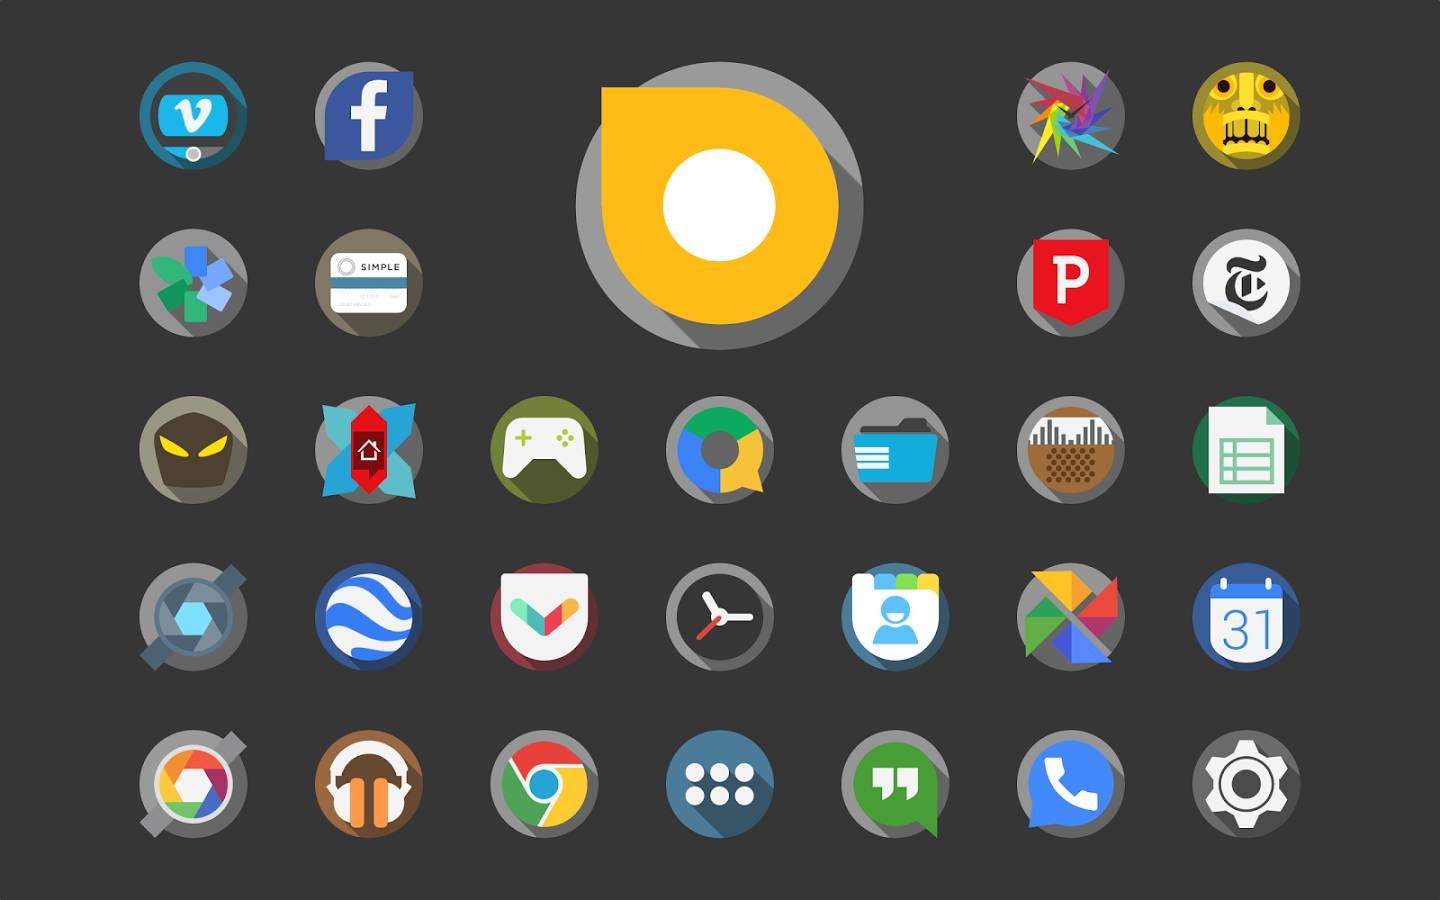 android - Invert icon color of status bar - Stack Overflow